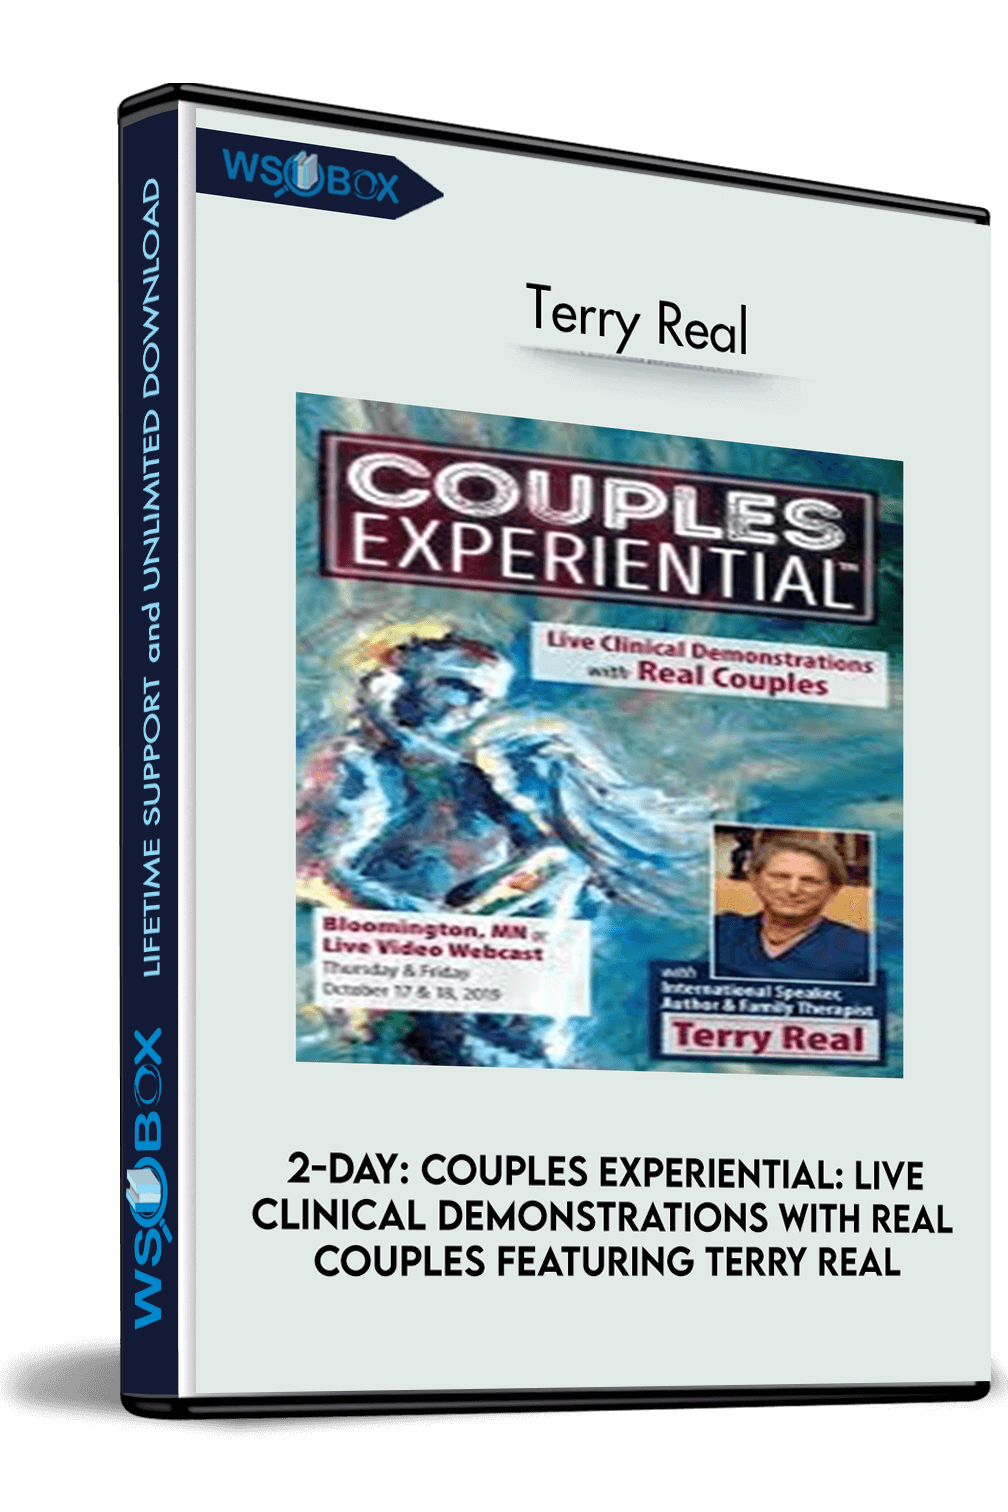 2-Day: Couples Experiential: Live Clinical Demonstrations with Real Couples featuring Terry Real – Terry Real